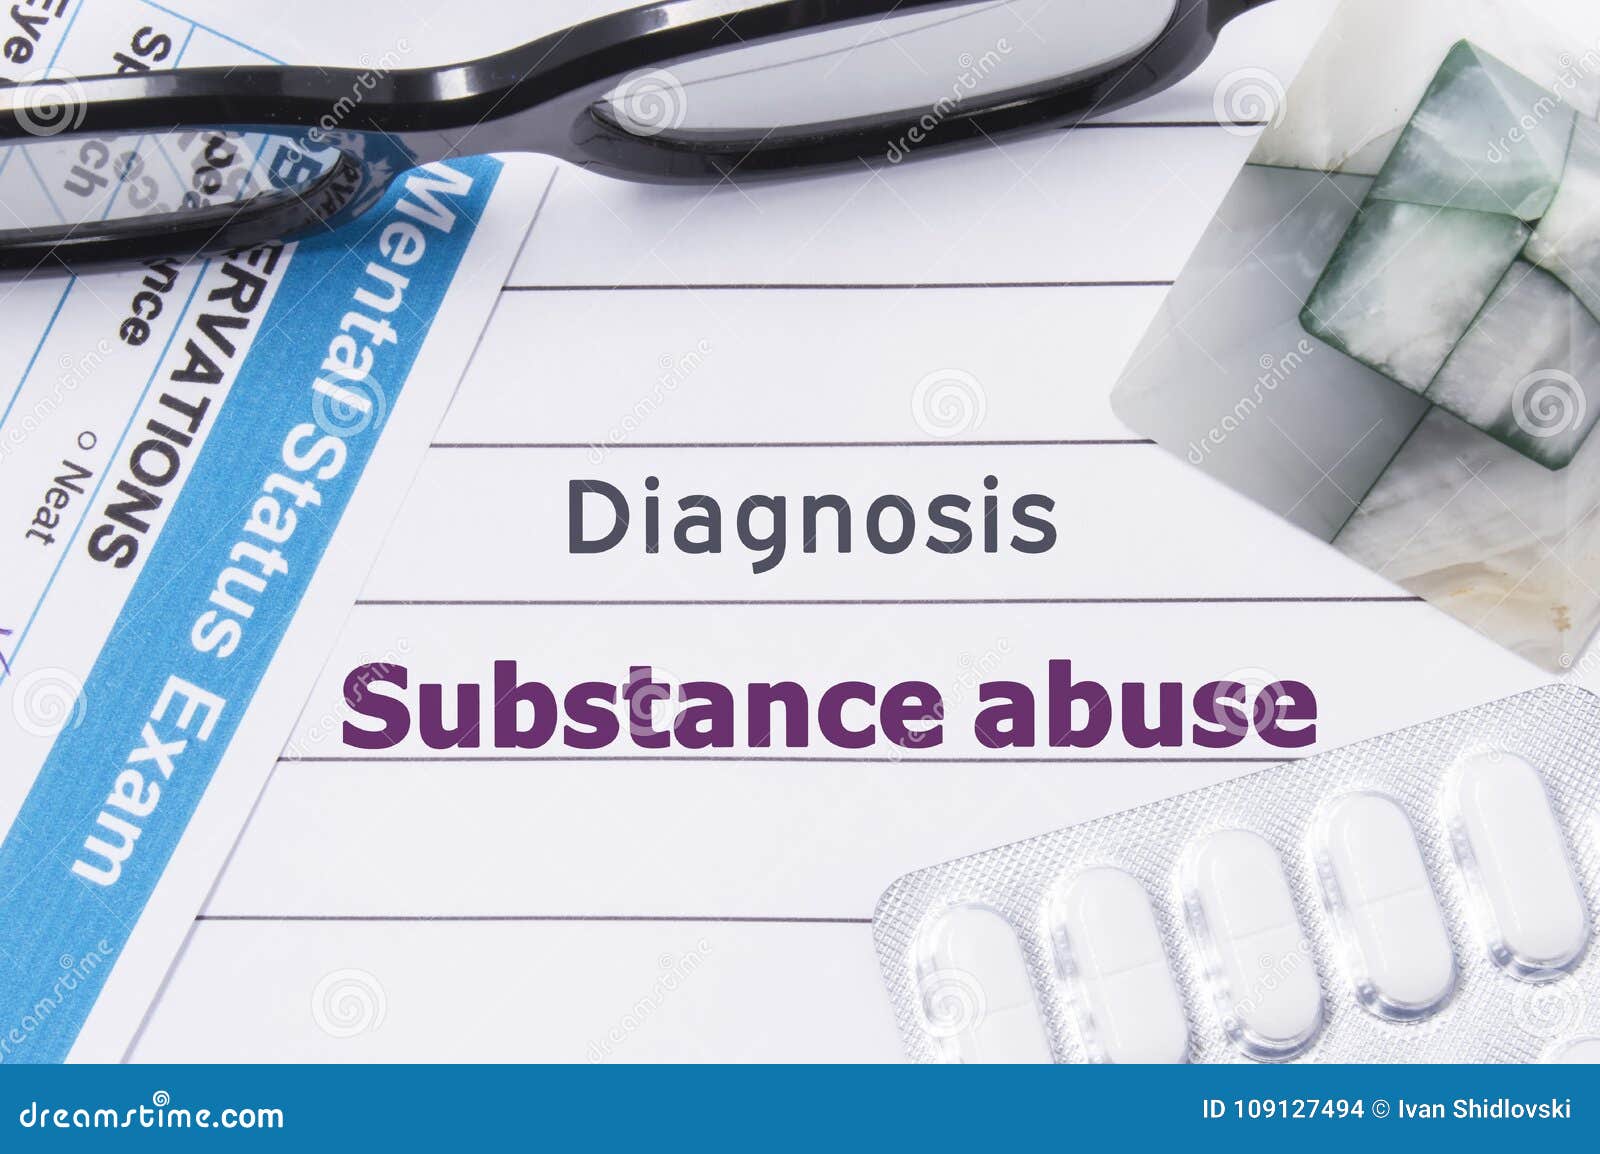 diagnosis substance abuse. medical notebook labeled diagnosis substance abuse, psychiatric mental questionnaire and pills are on t